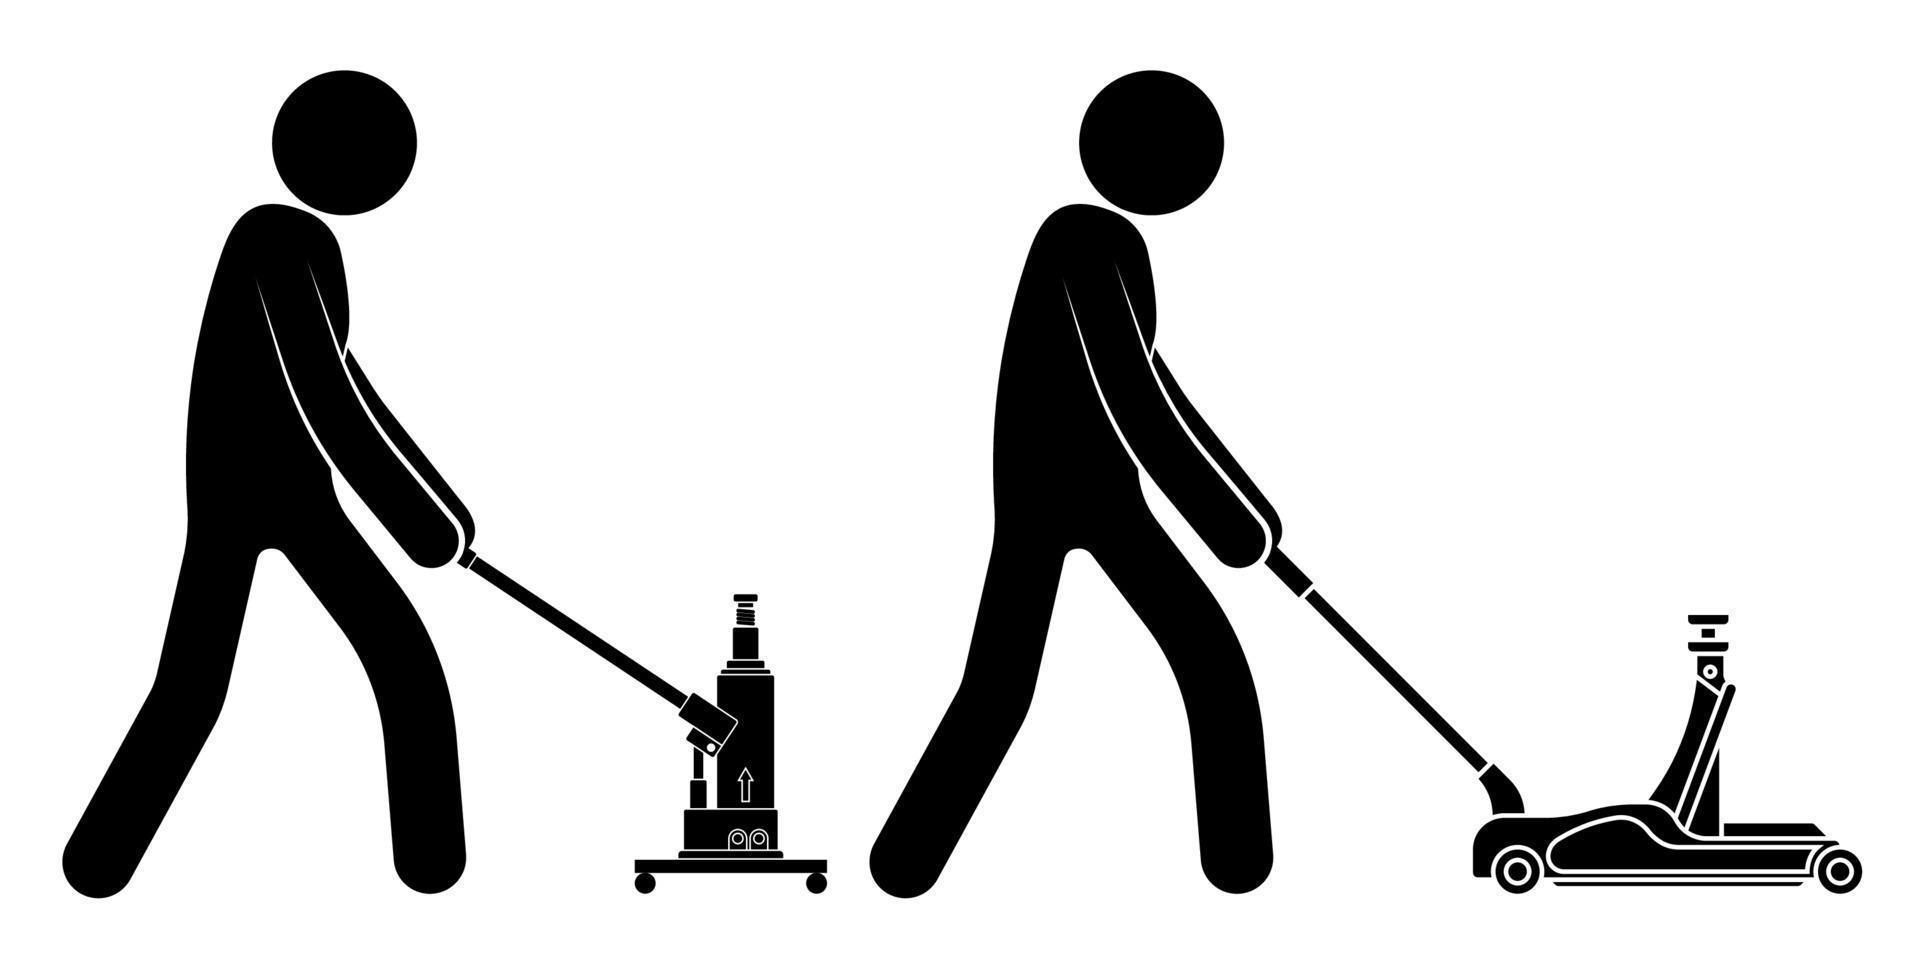 stick figure, workshop mechanic rolls a mechanical manual car jack. Belt in repair shops. Increased lift. Lifting the car to change wheels. Black and white vector